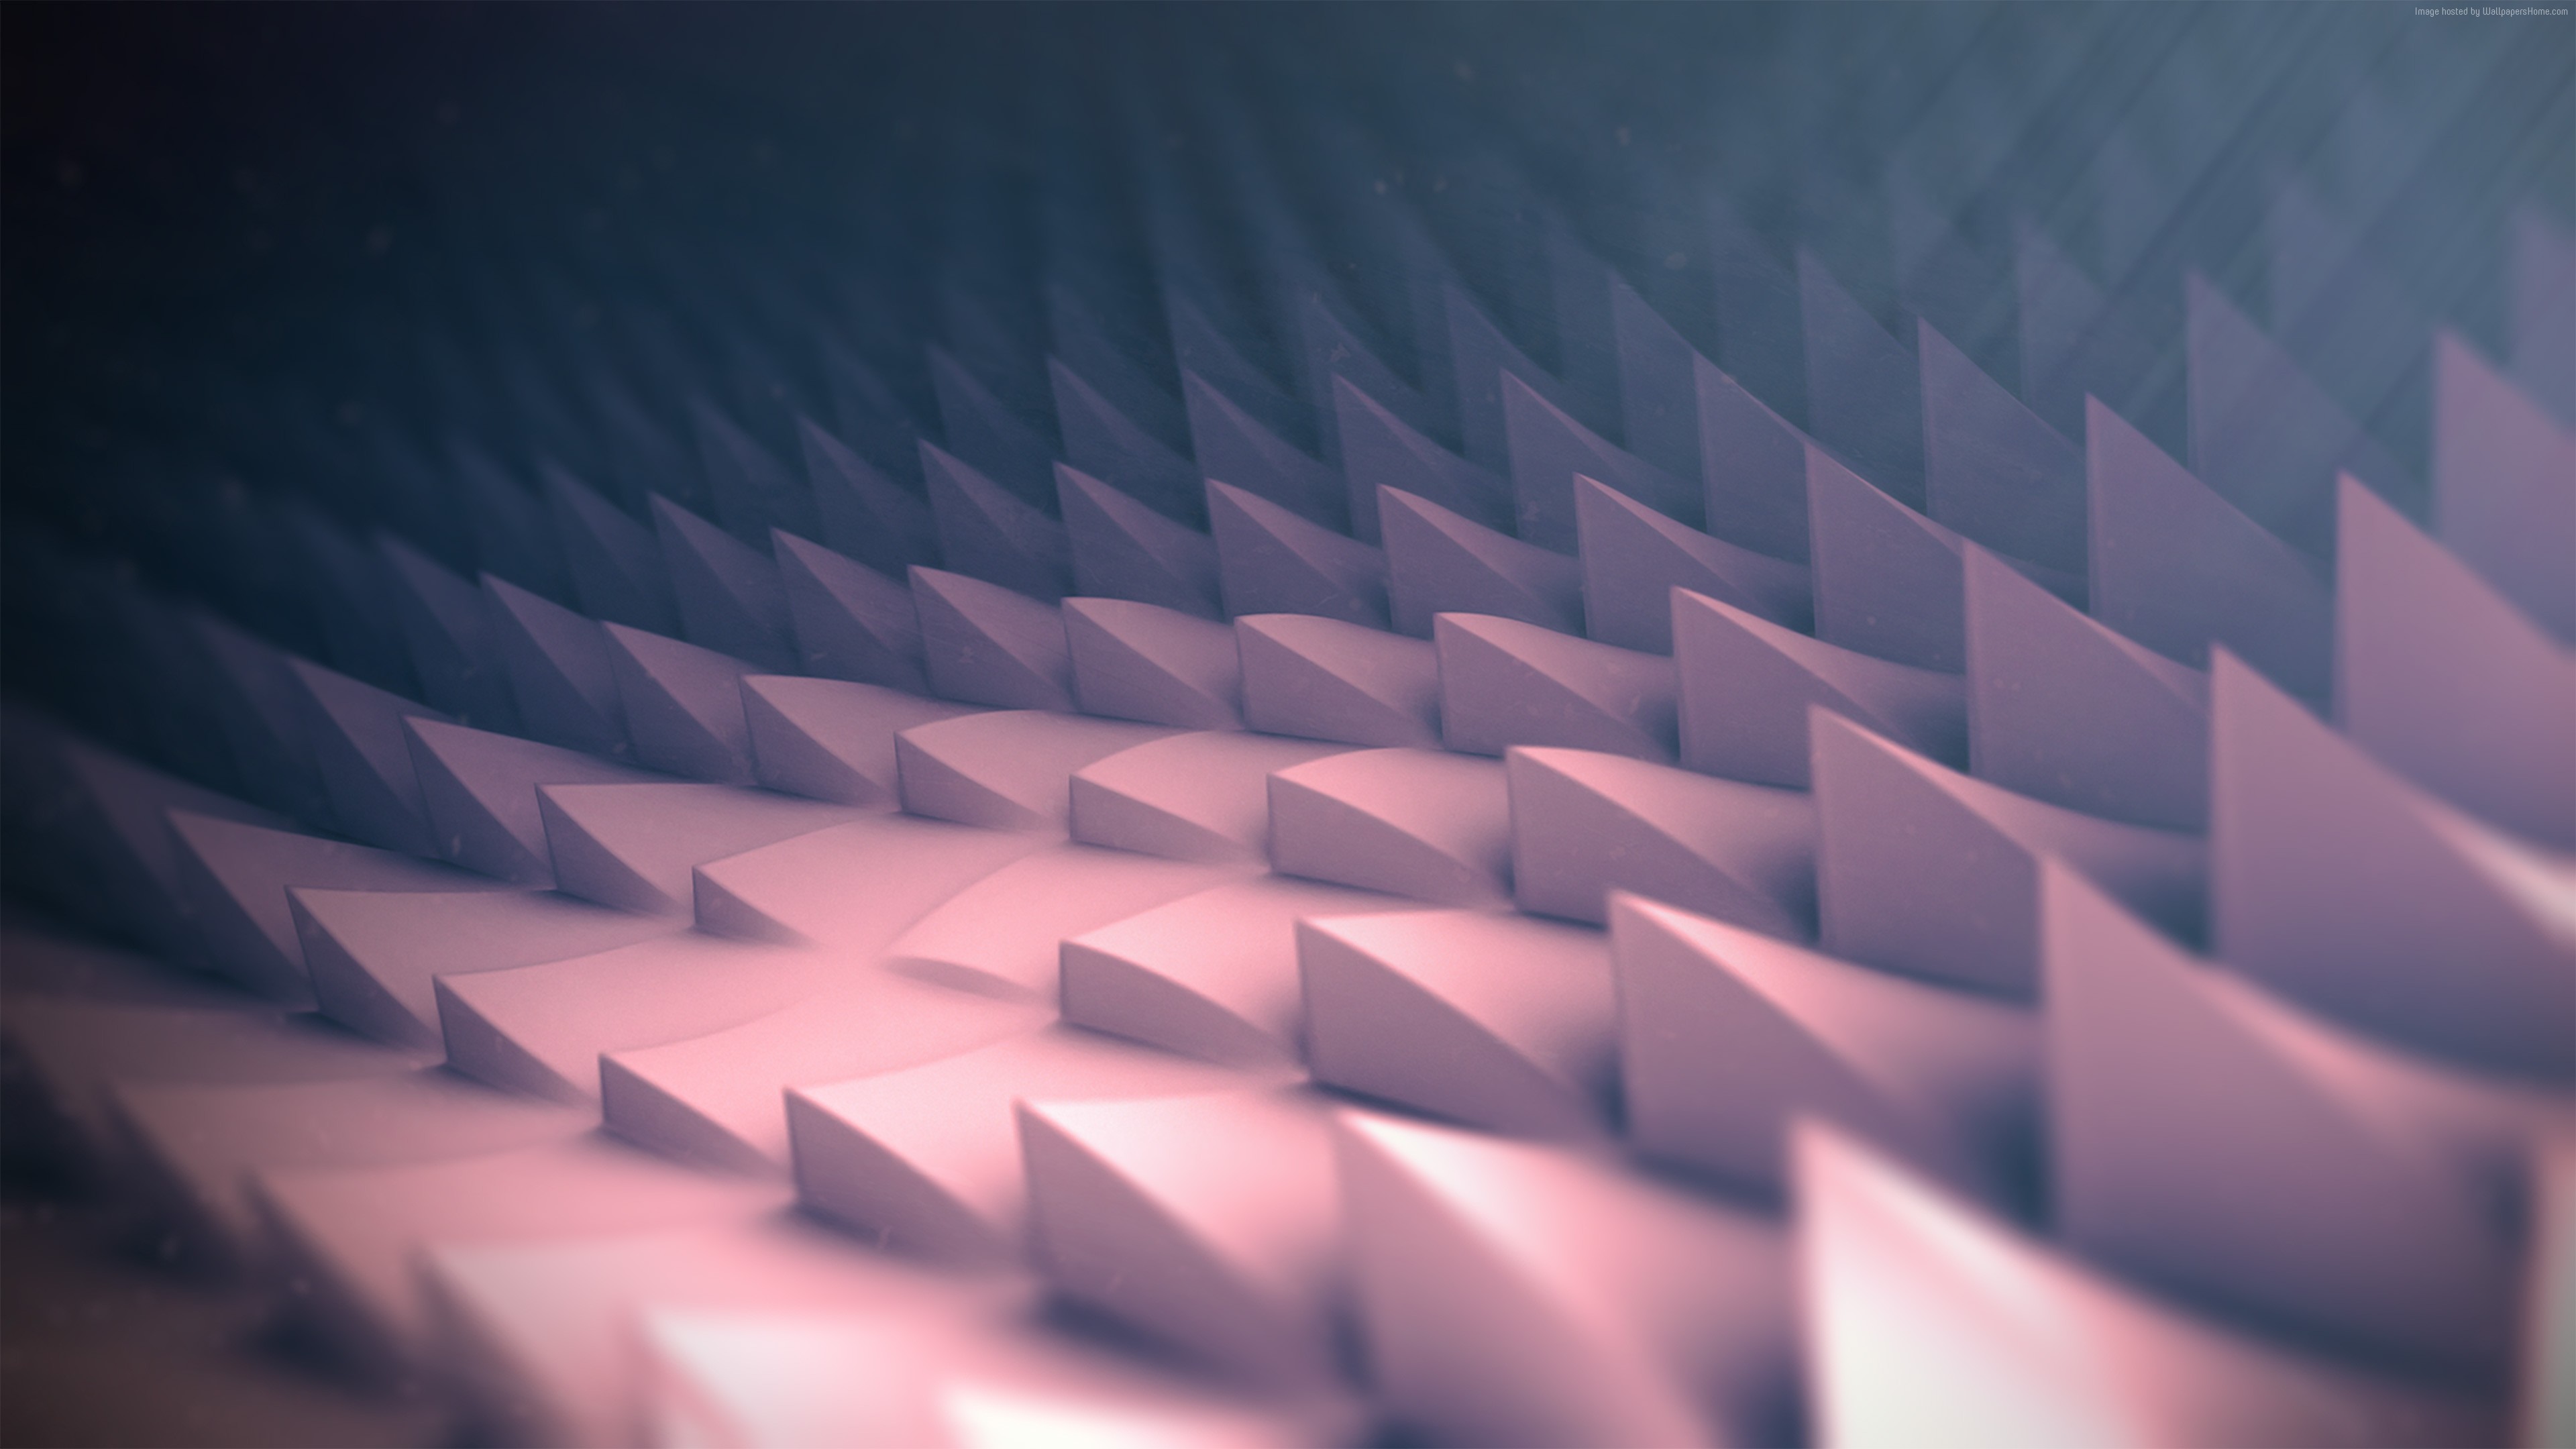 Previous Wallpaper - Polygons 3d Abstract , HD Wallpaper & Backgrounds